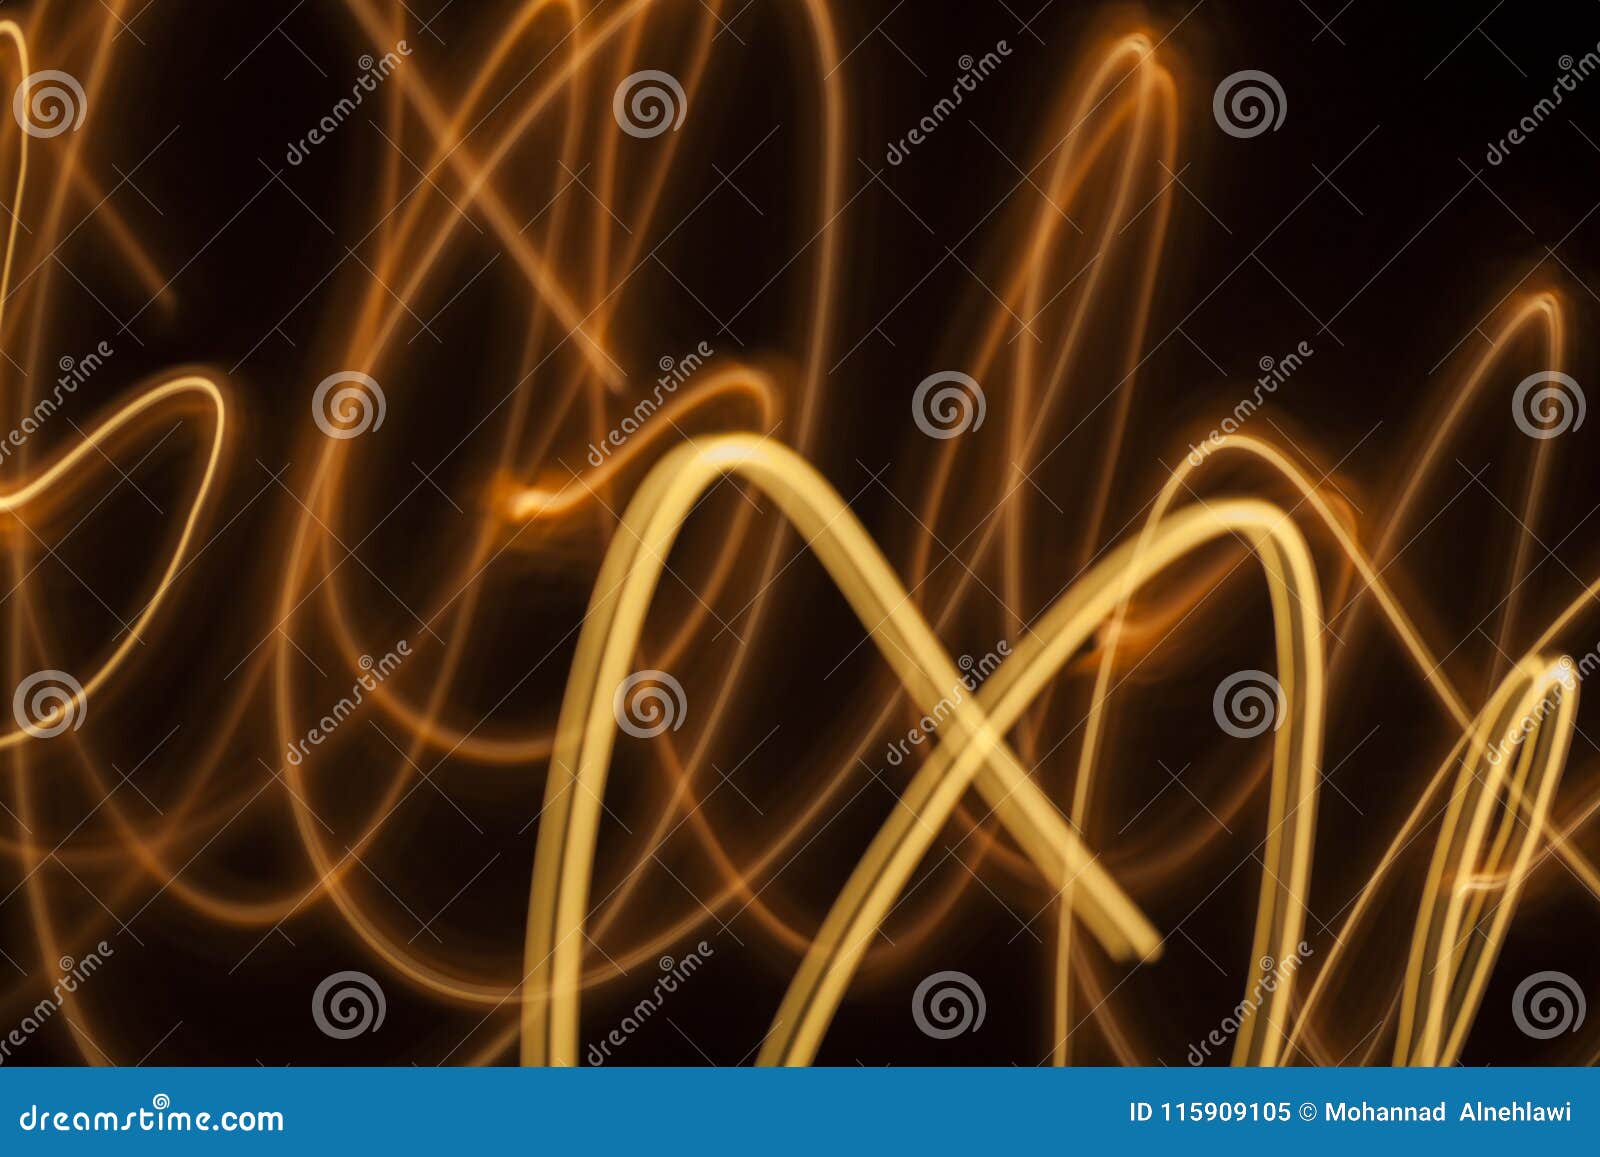 Swirl Sparkling Glowing Lines Background Stock Image - Image of white ...